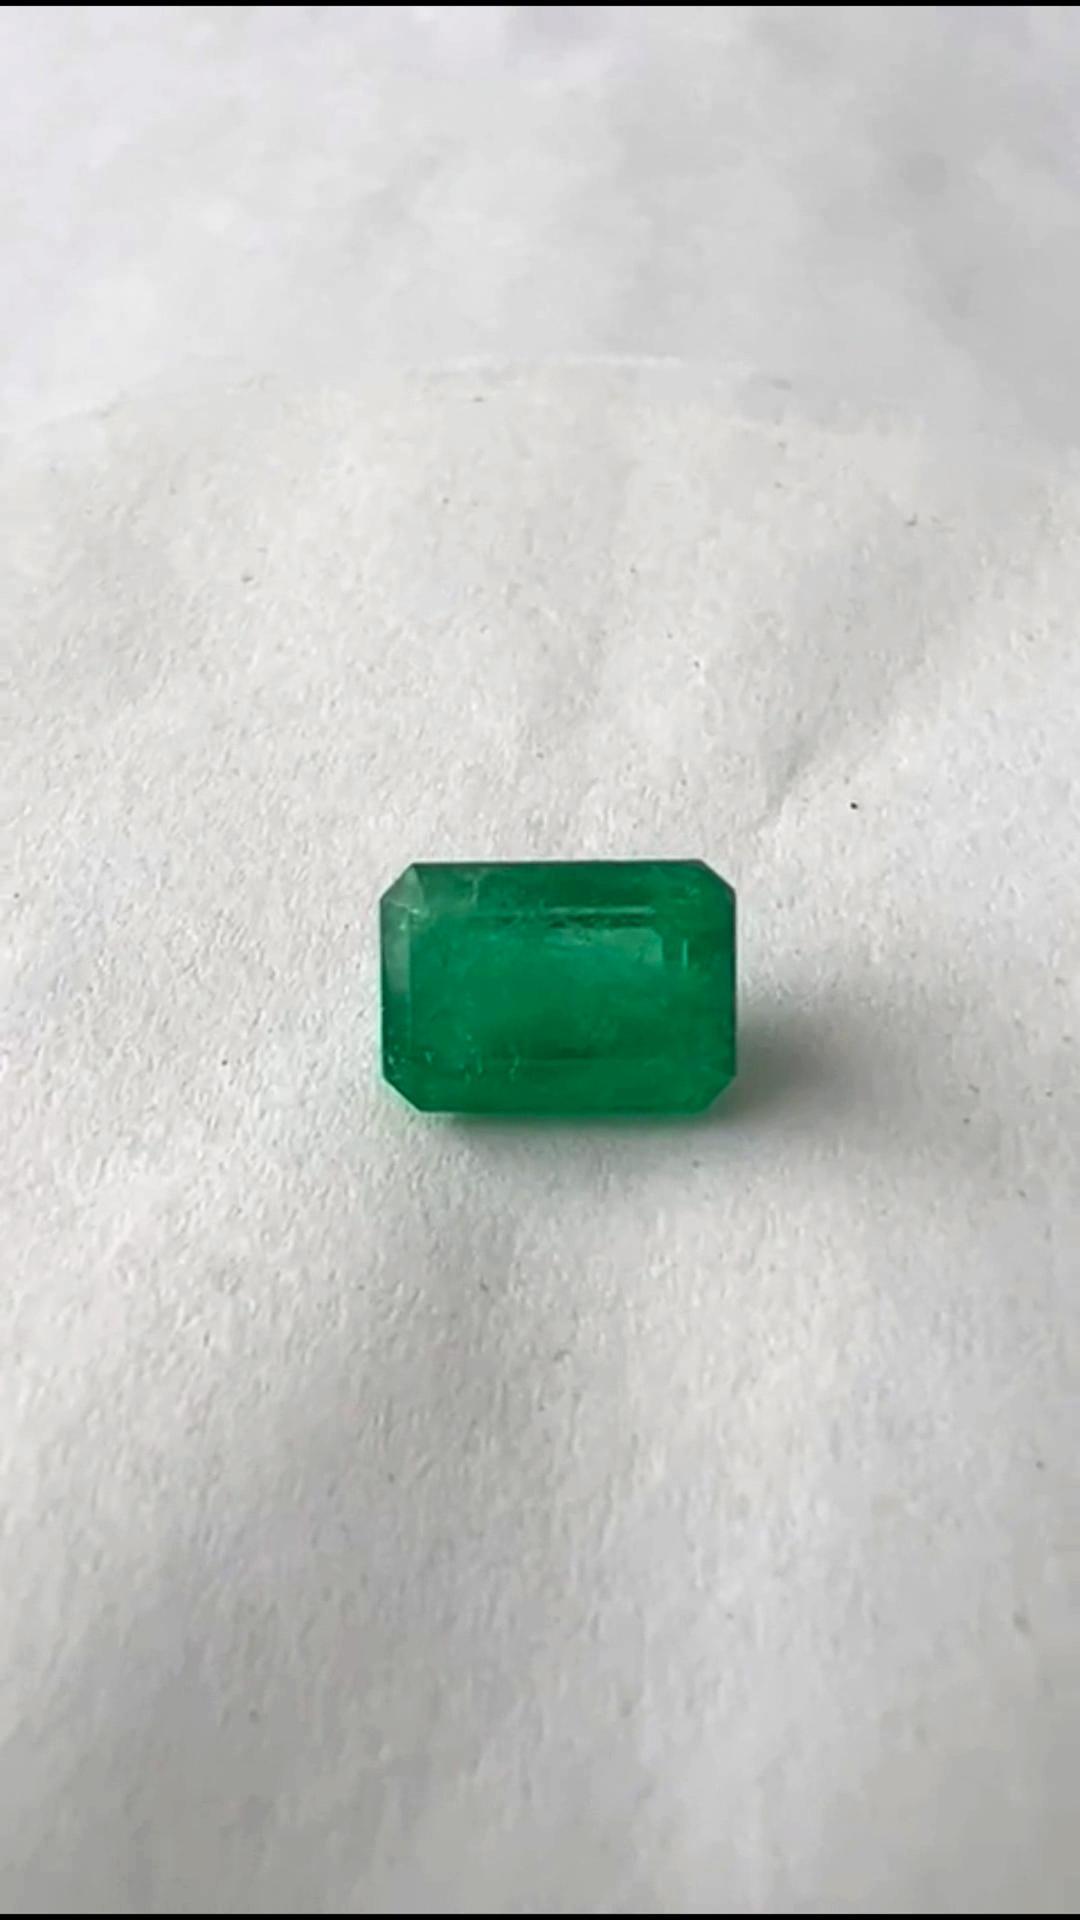 4.16 Ct. Colombian Emerald